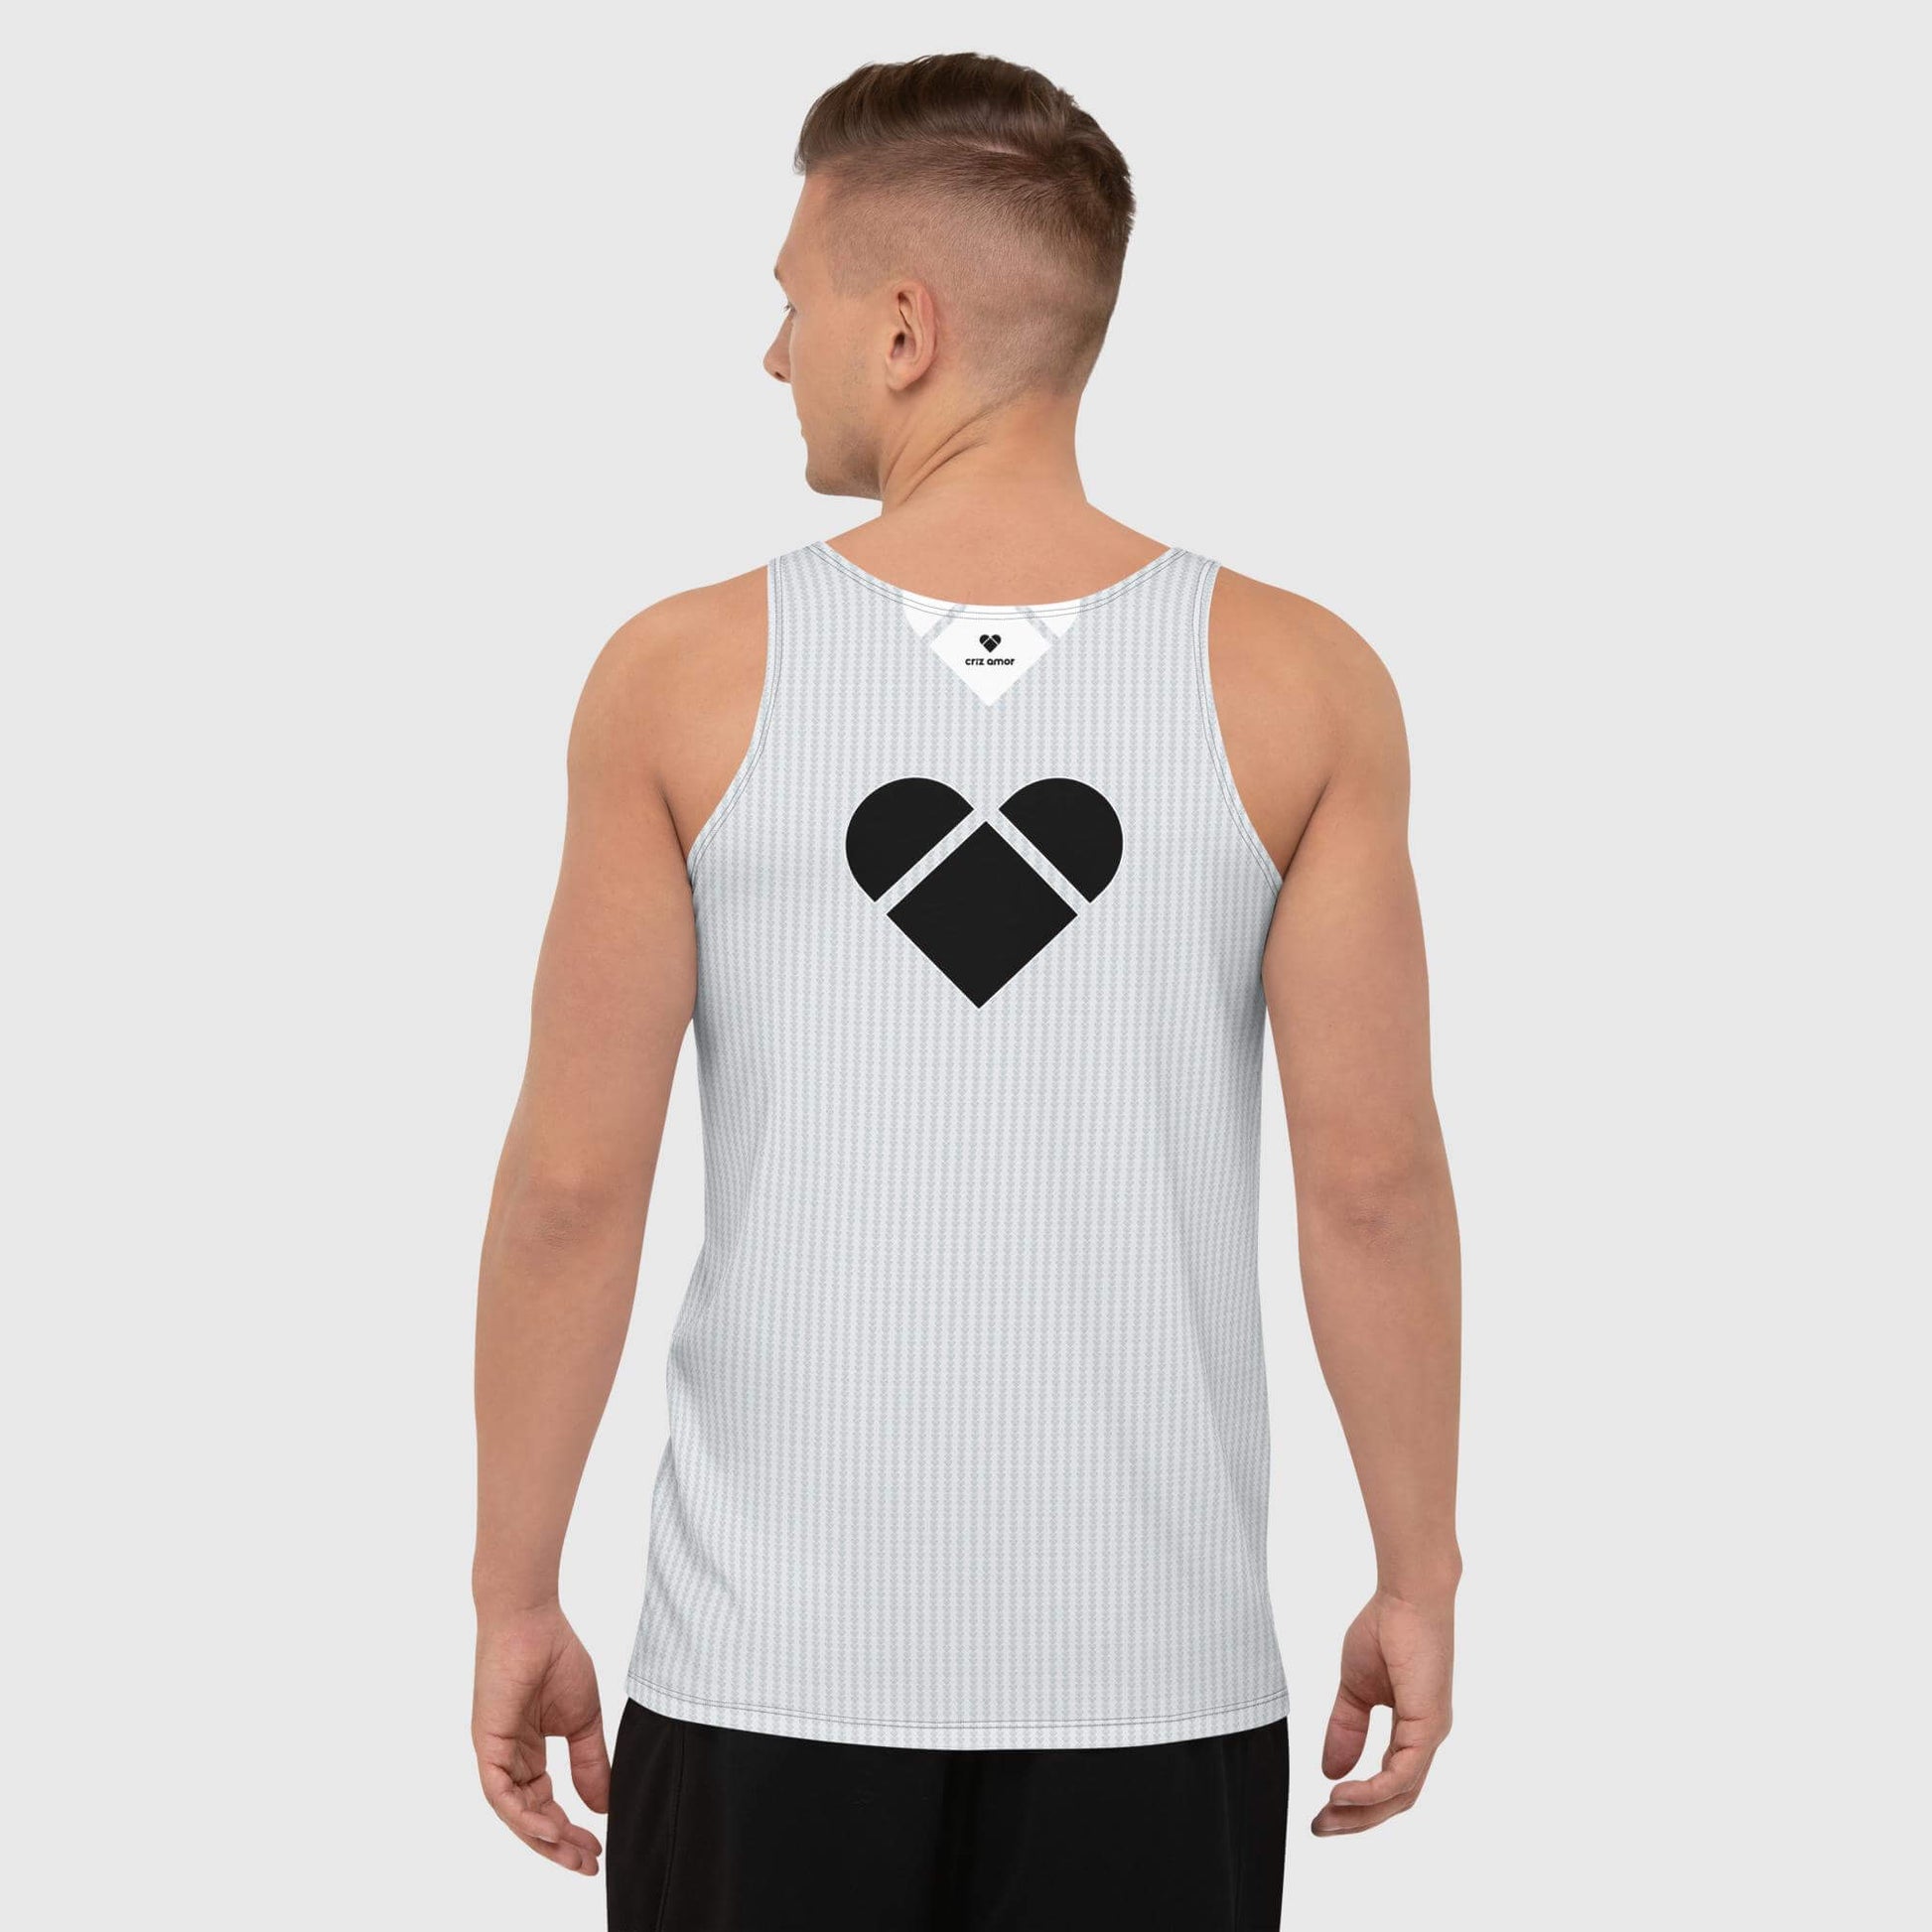 male model wearing Patterned tank top perfect for casual or sportswear